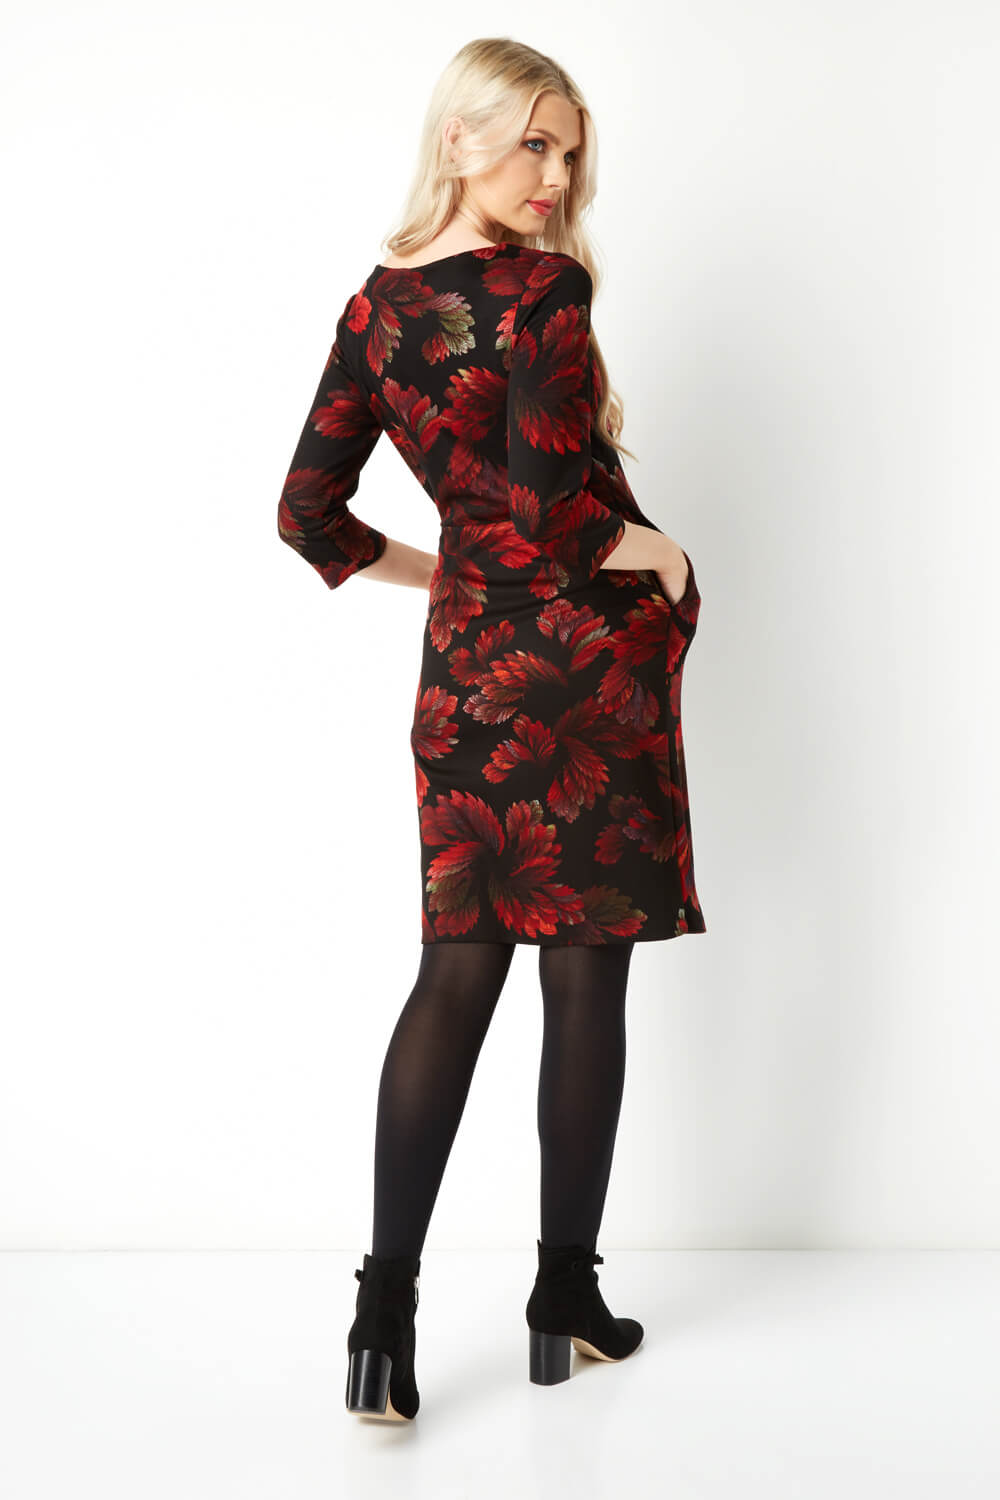 Red Floral Dress with Pockets, Image 3 of 5